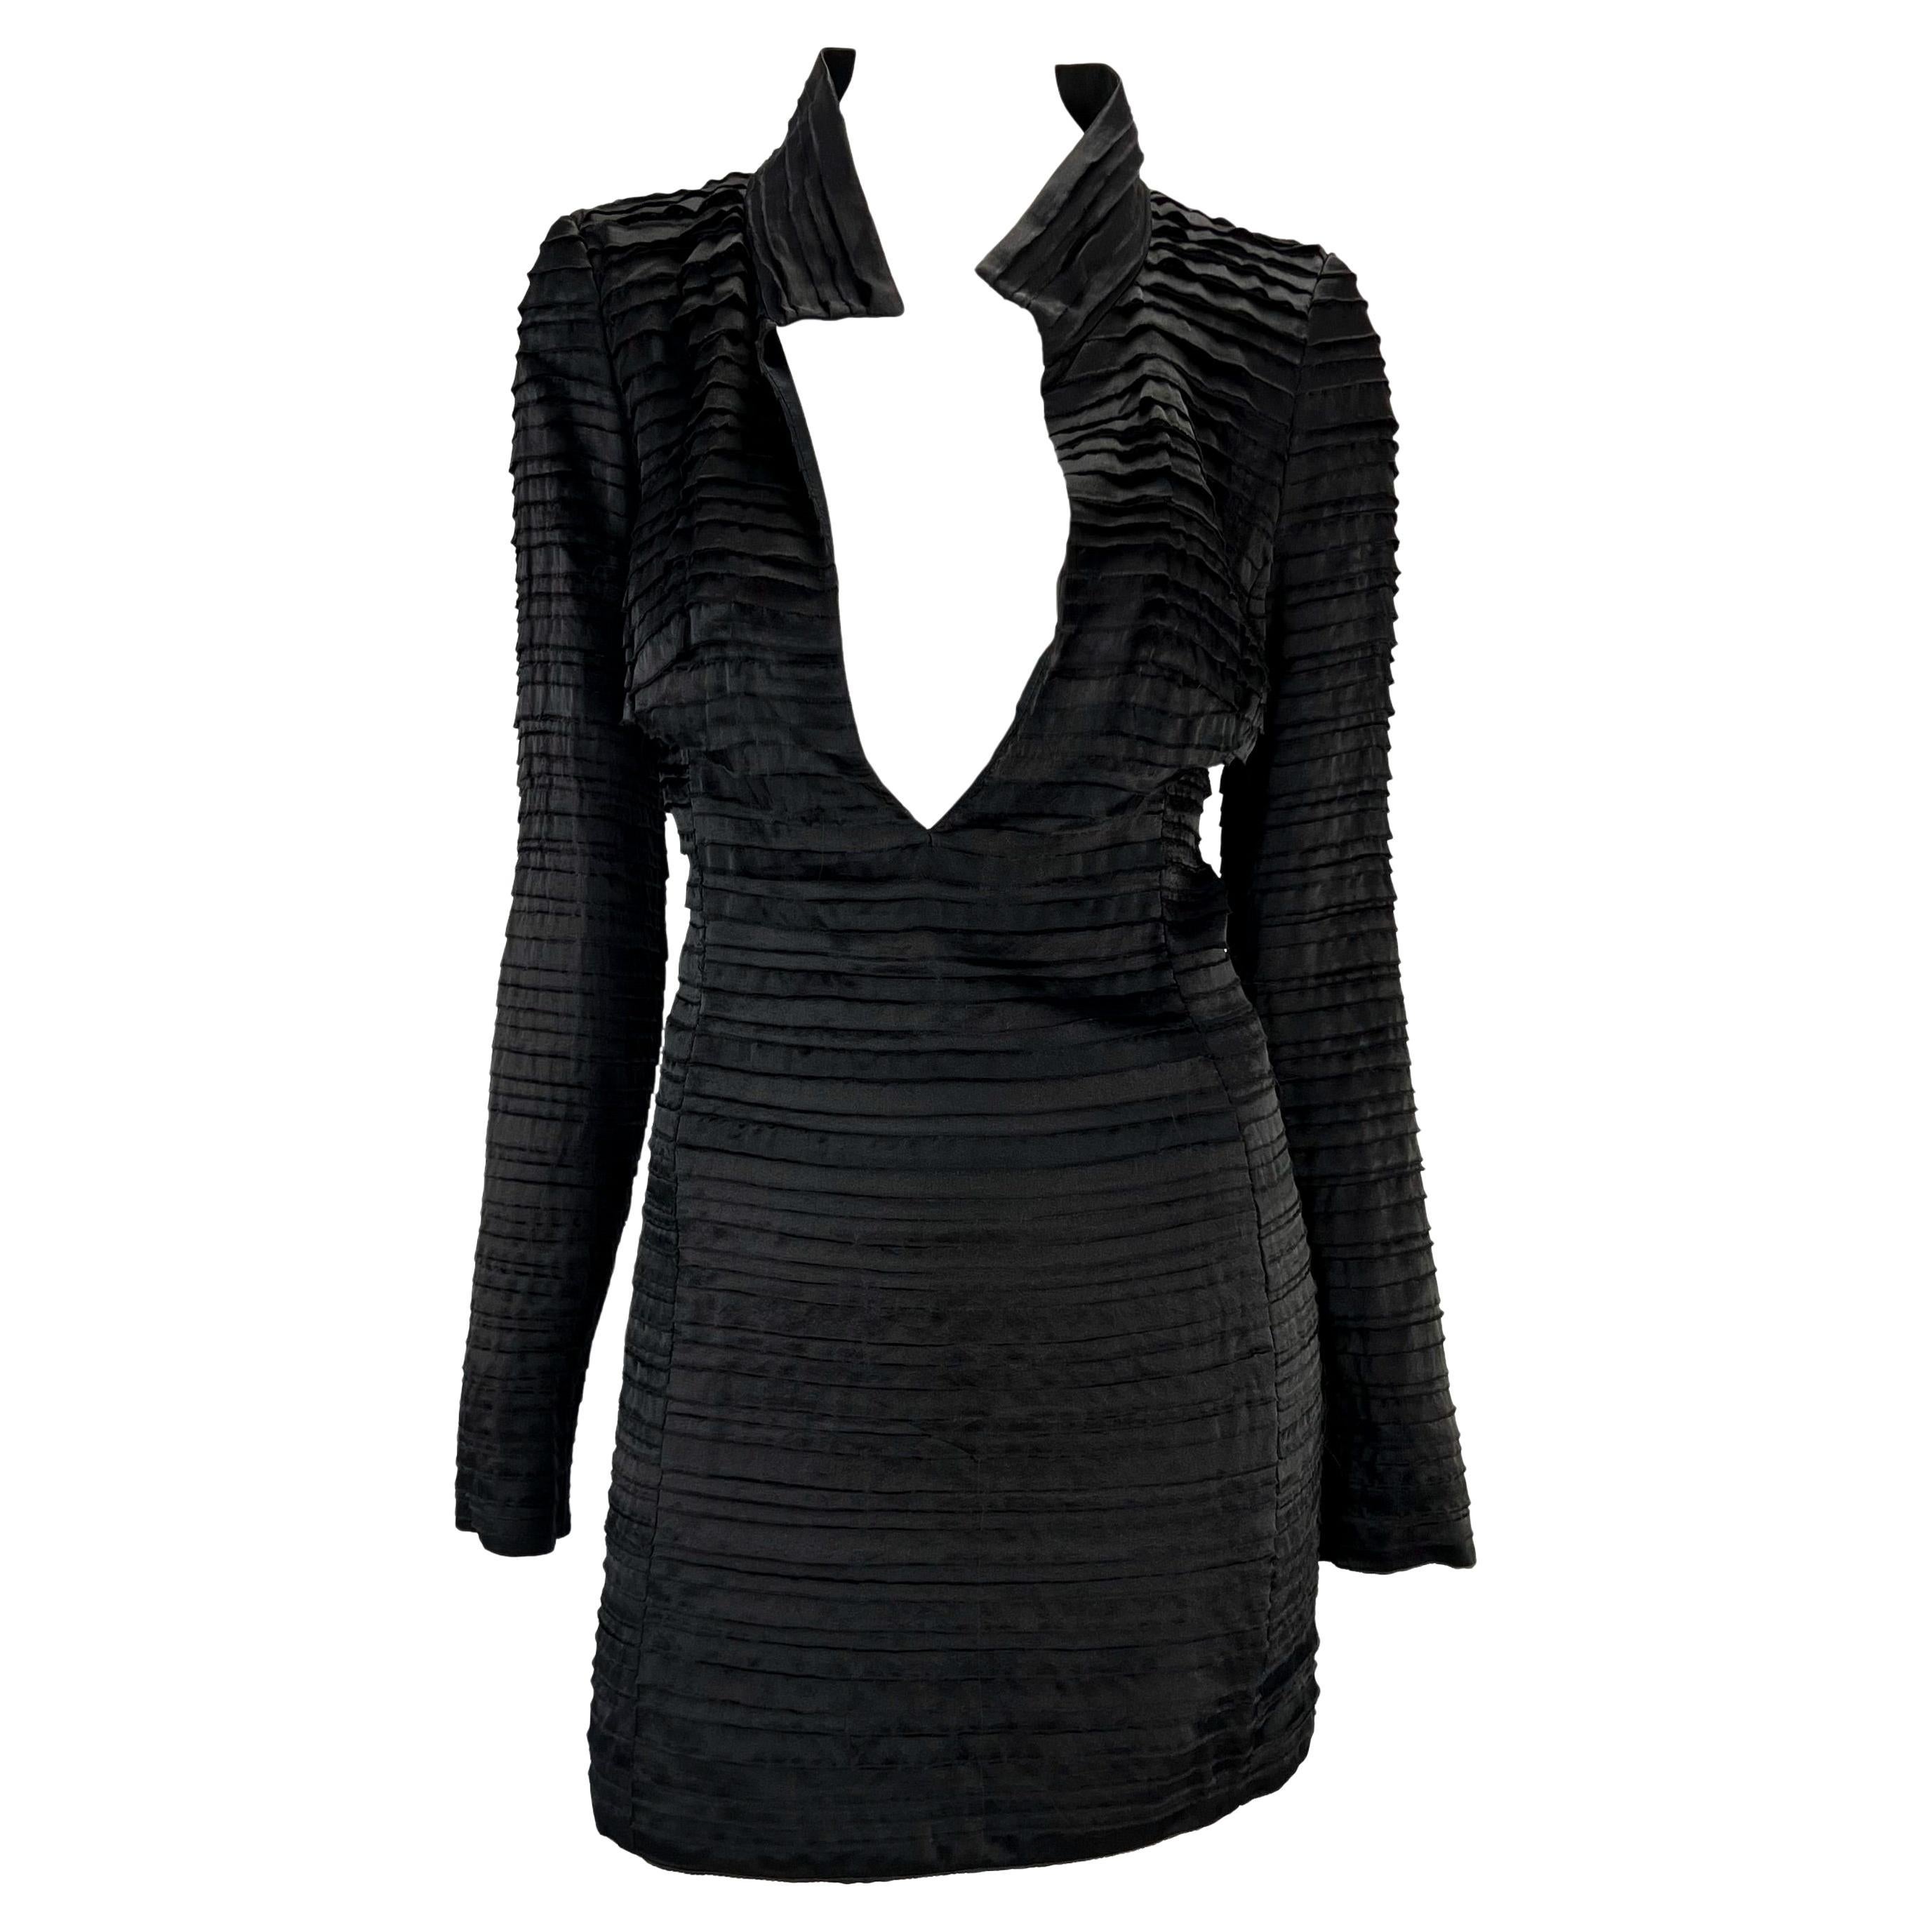 S/S 2003 Gucci by Tom Ford Runway Black Raw Ribbon Plunging Mini Dress In Good Condition For Sale In West Hollywood, CA